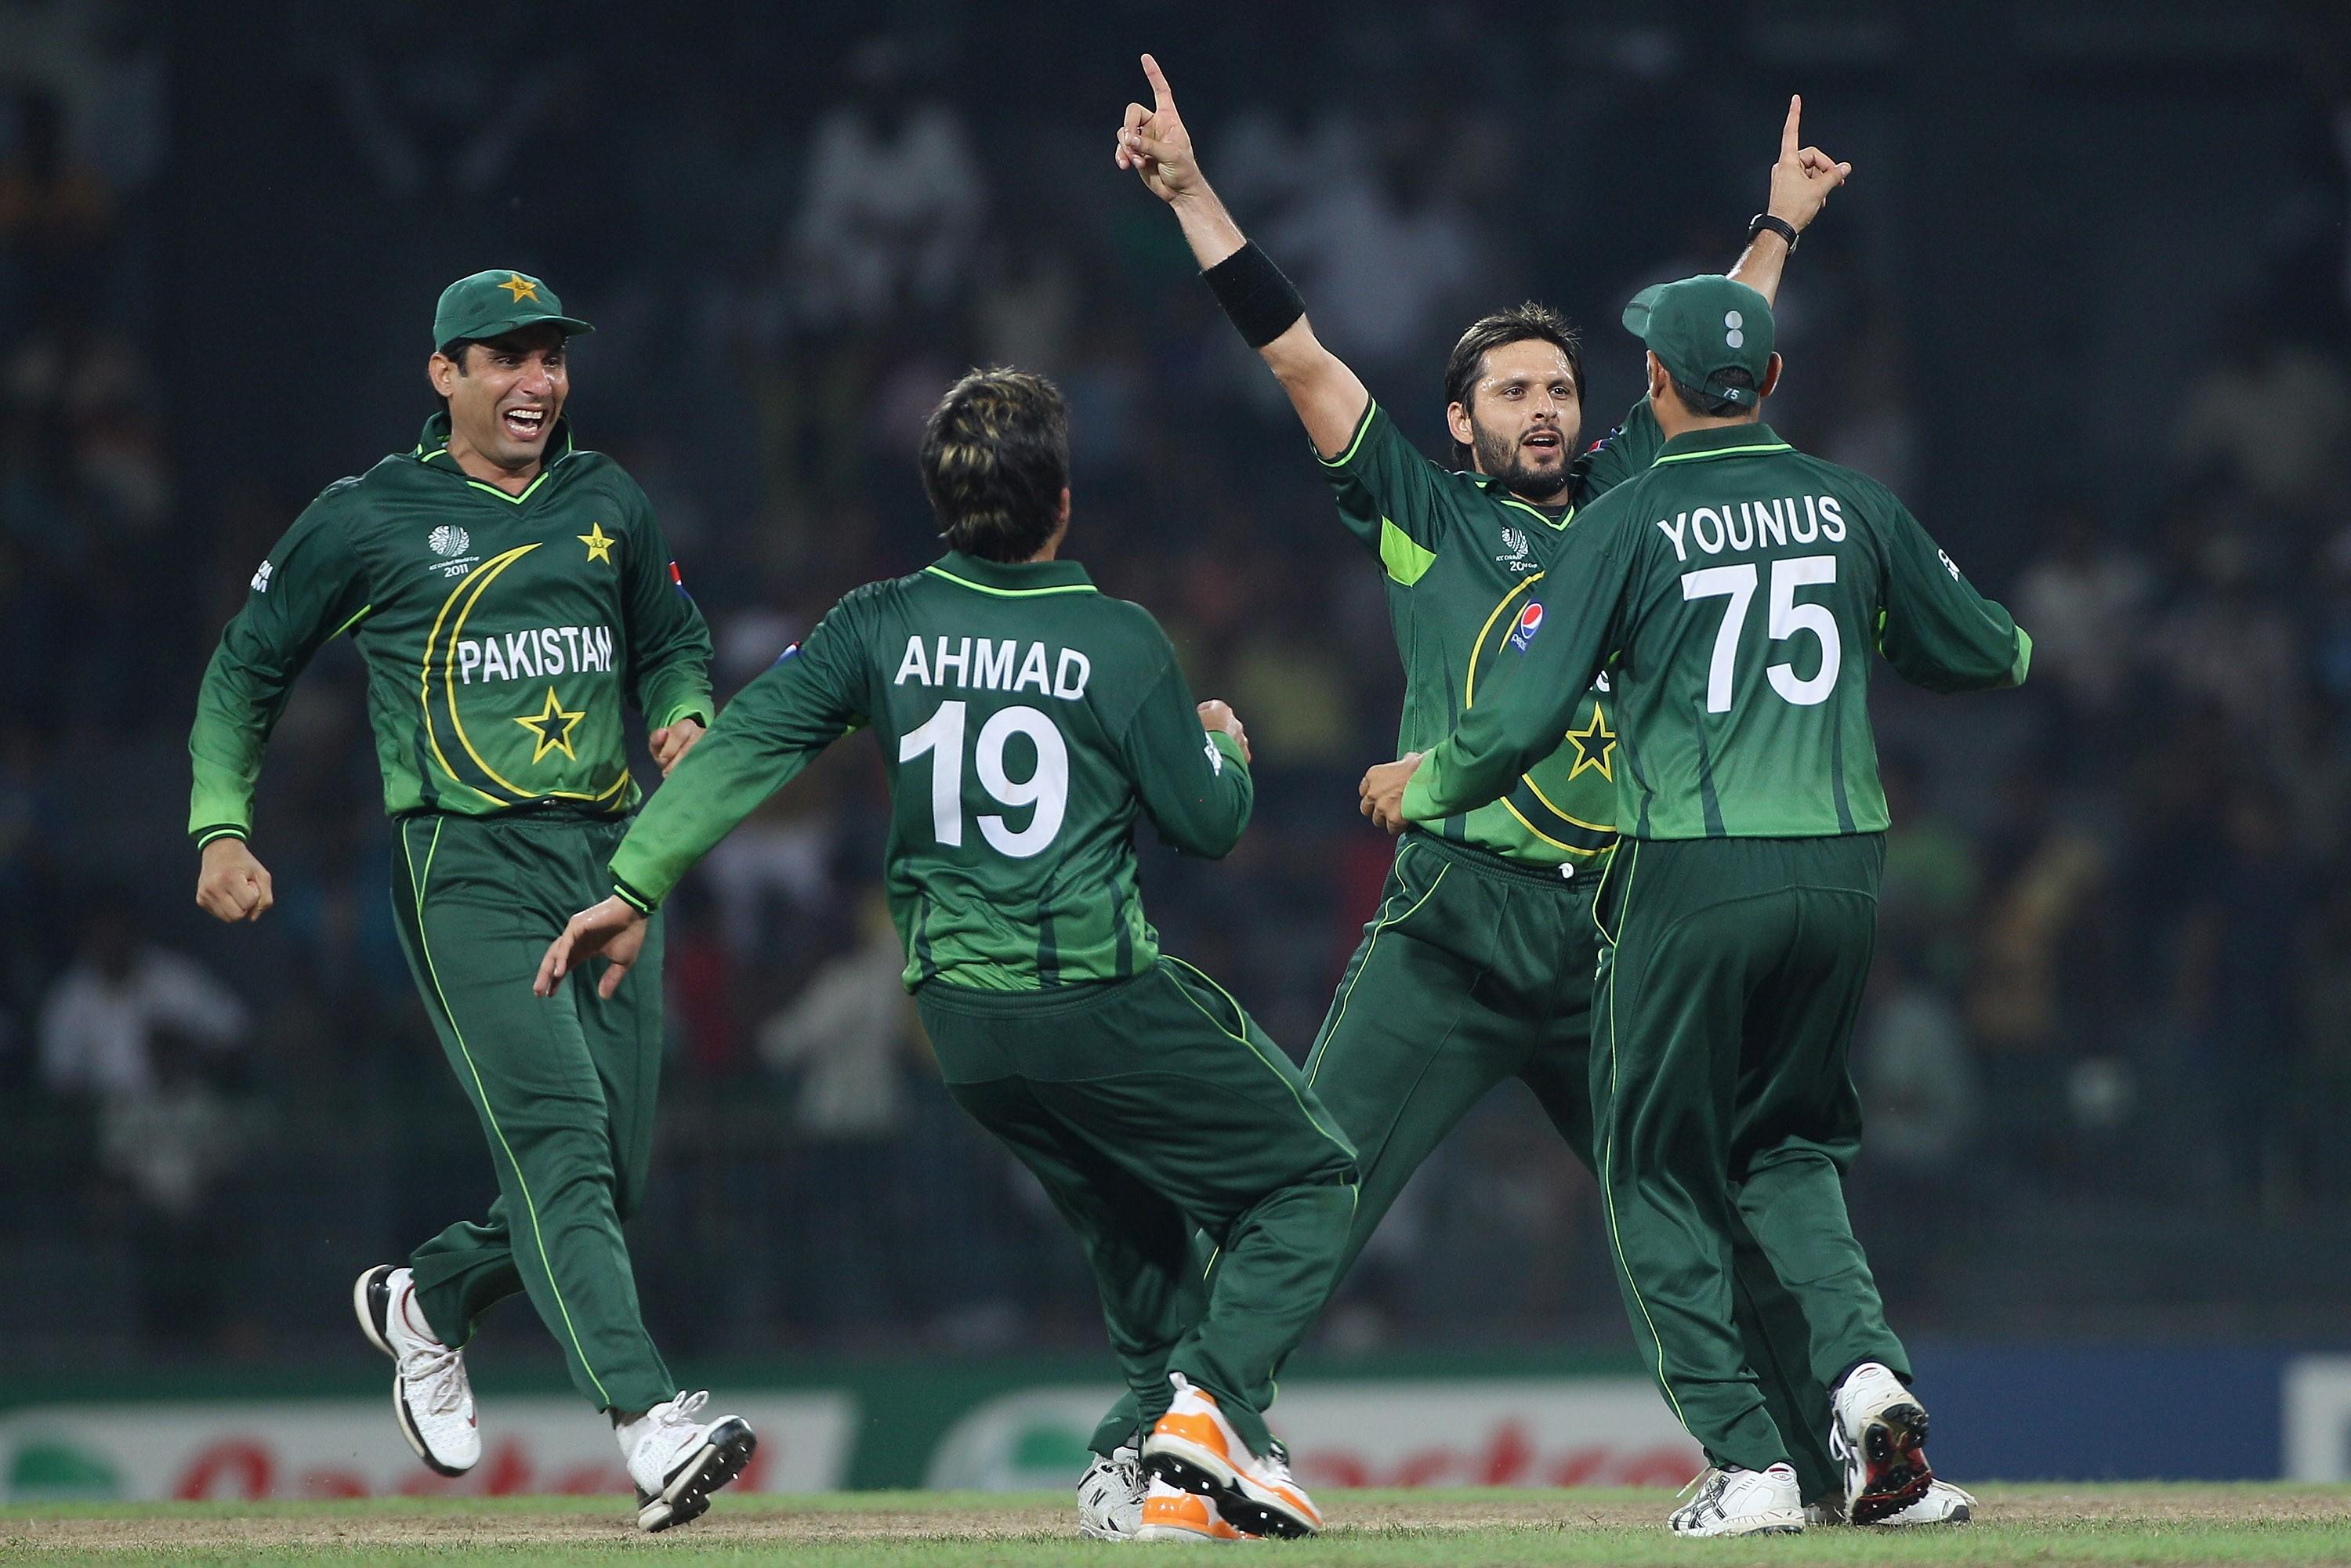 Shahid Afridi and other Pakistani Cricketer Celebrates after Take